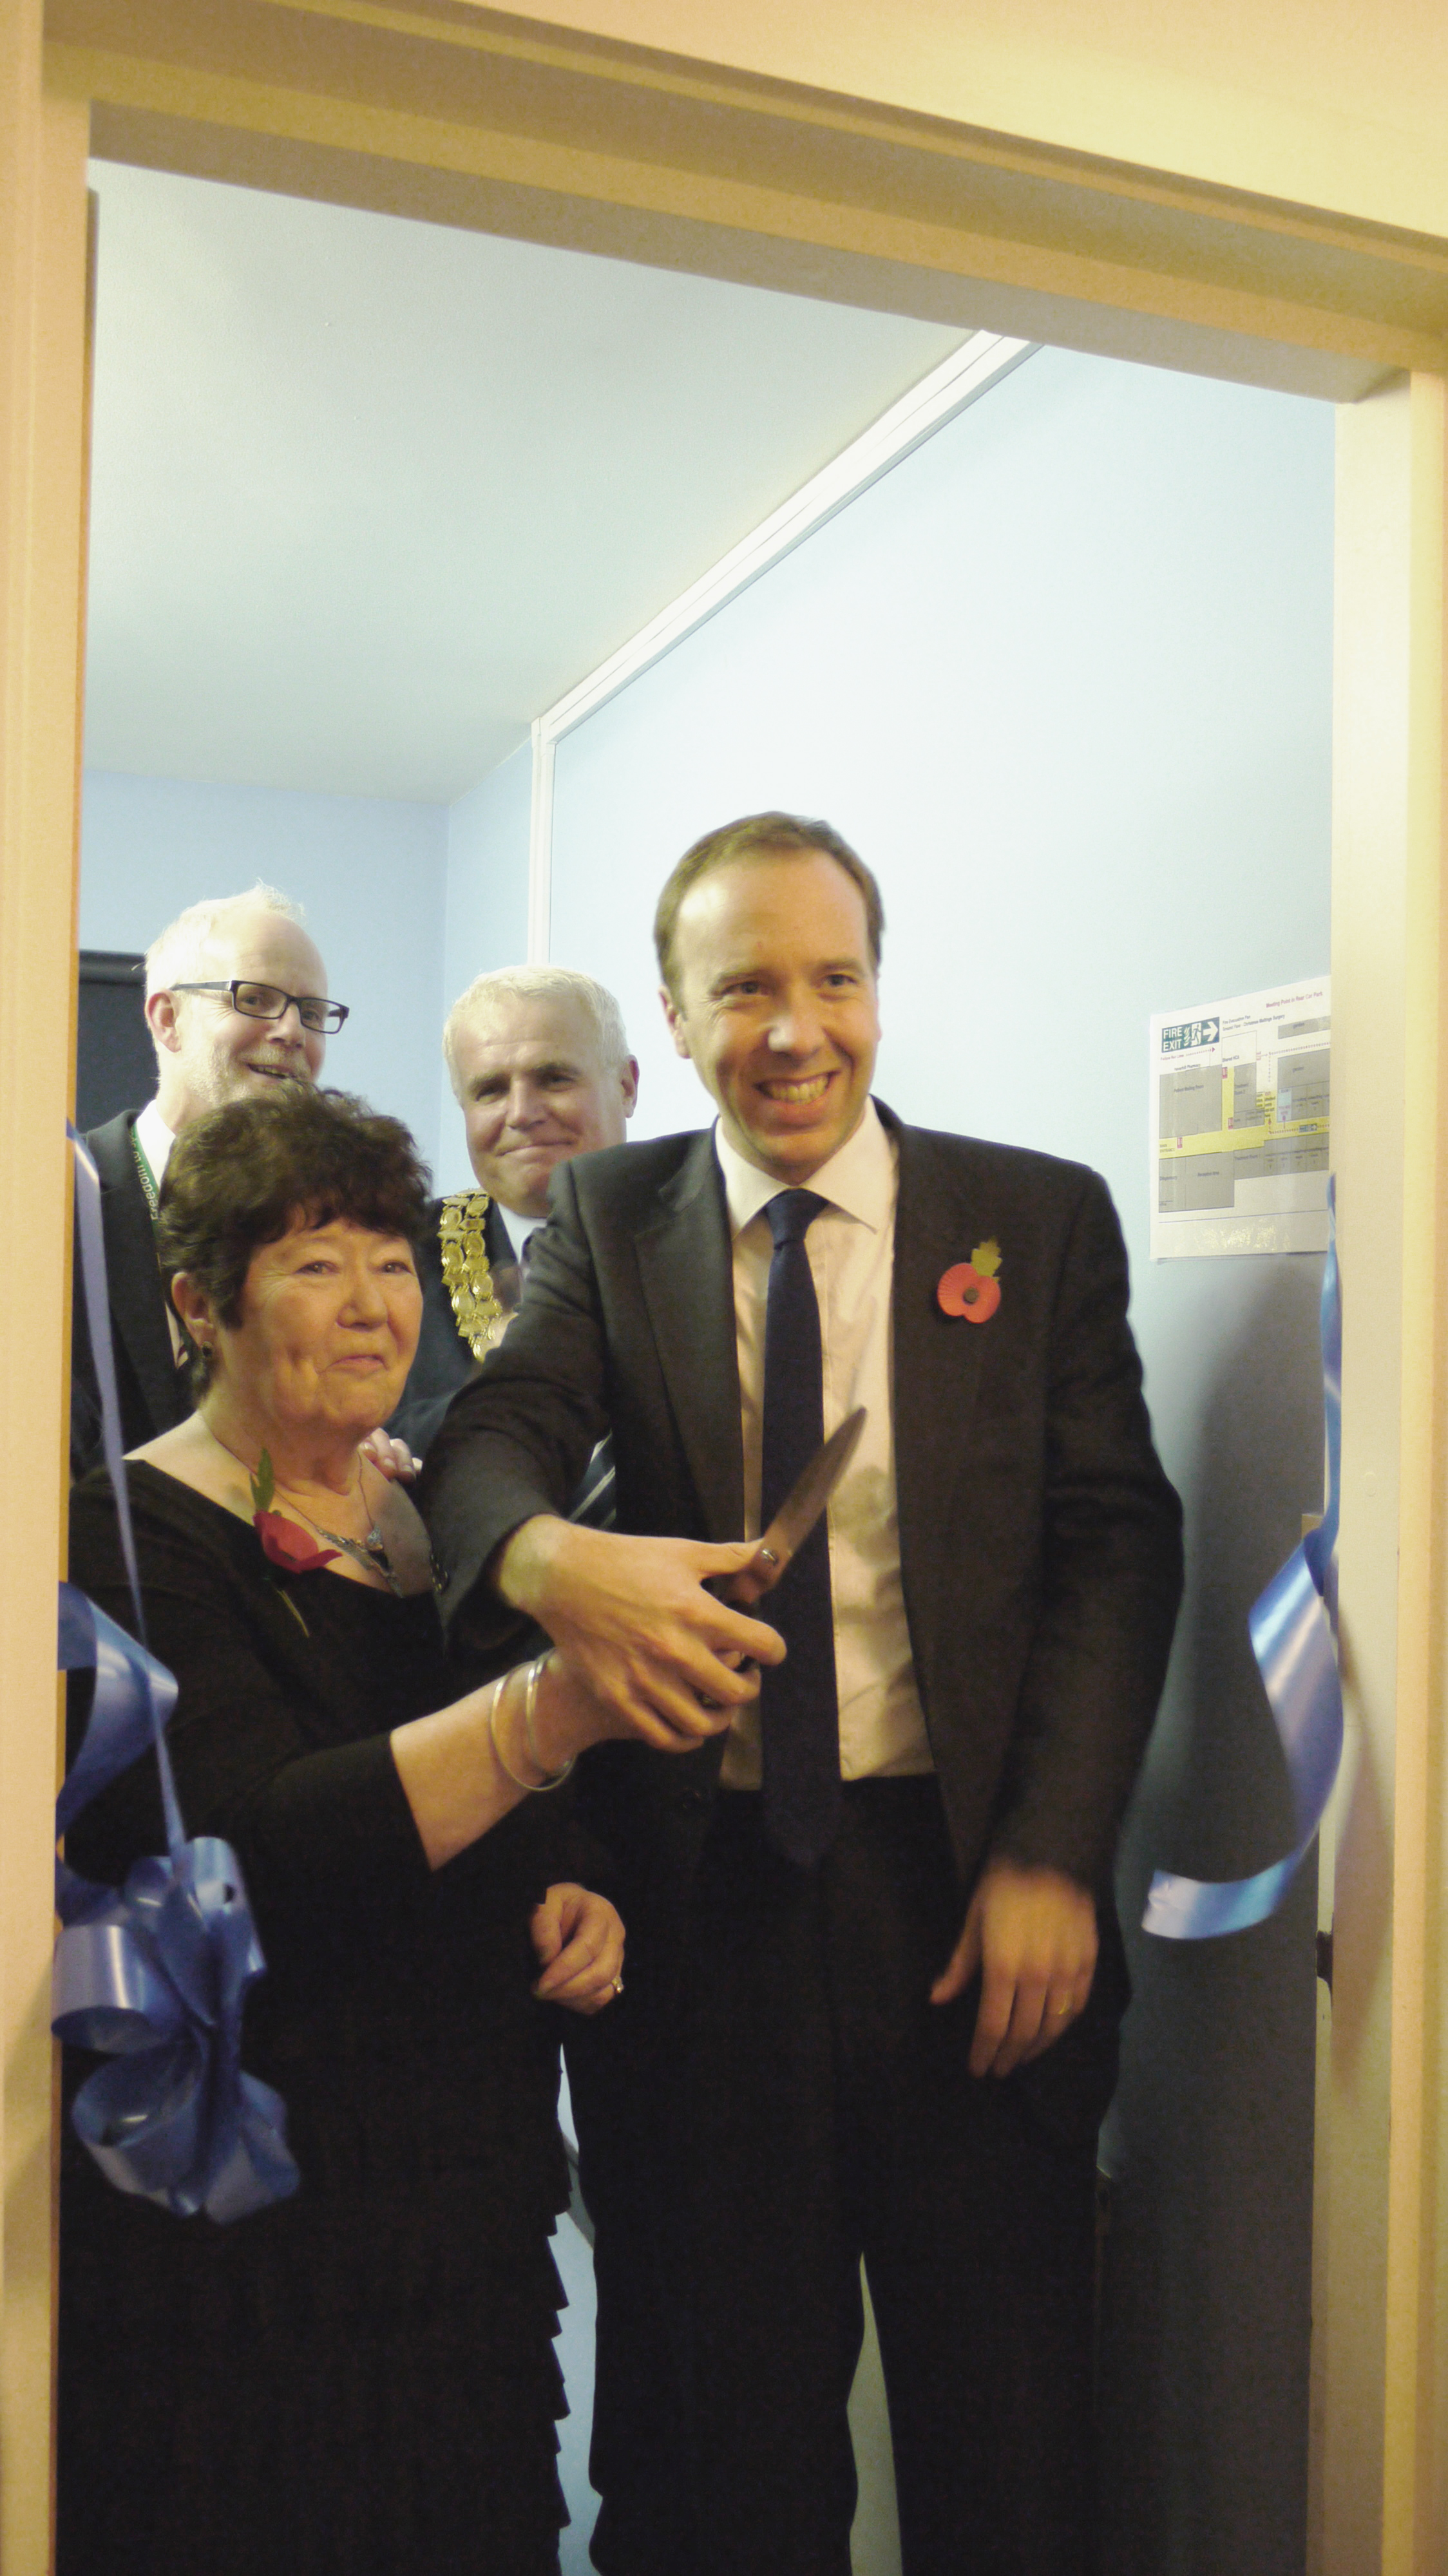 New Haverhill ultrasound service officially opened by local West Suffolk MP and Secretary of State for Health and Social Care, Matthew Hancock, and fundraiser Mrs Betty McLatchy